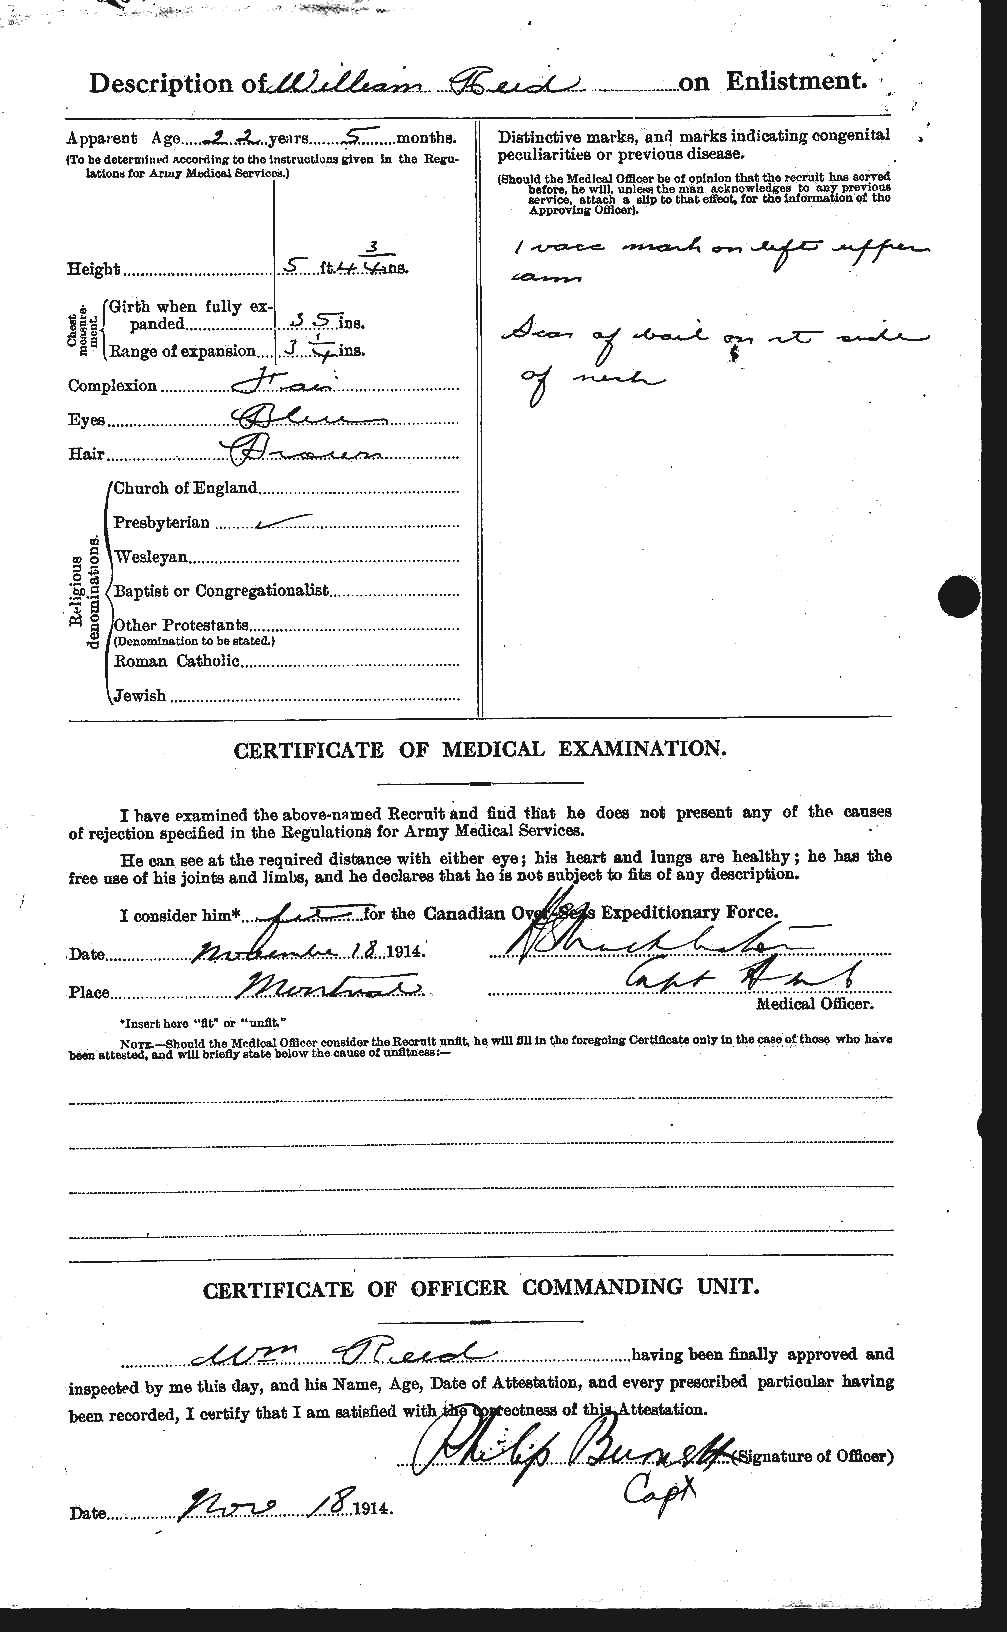 Personnel Records of the First World War - CEF 596910b